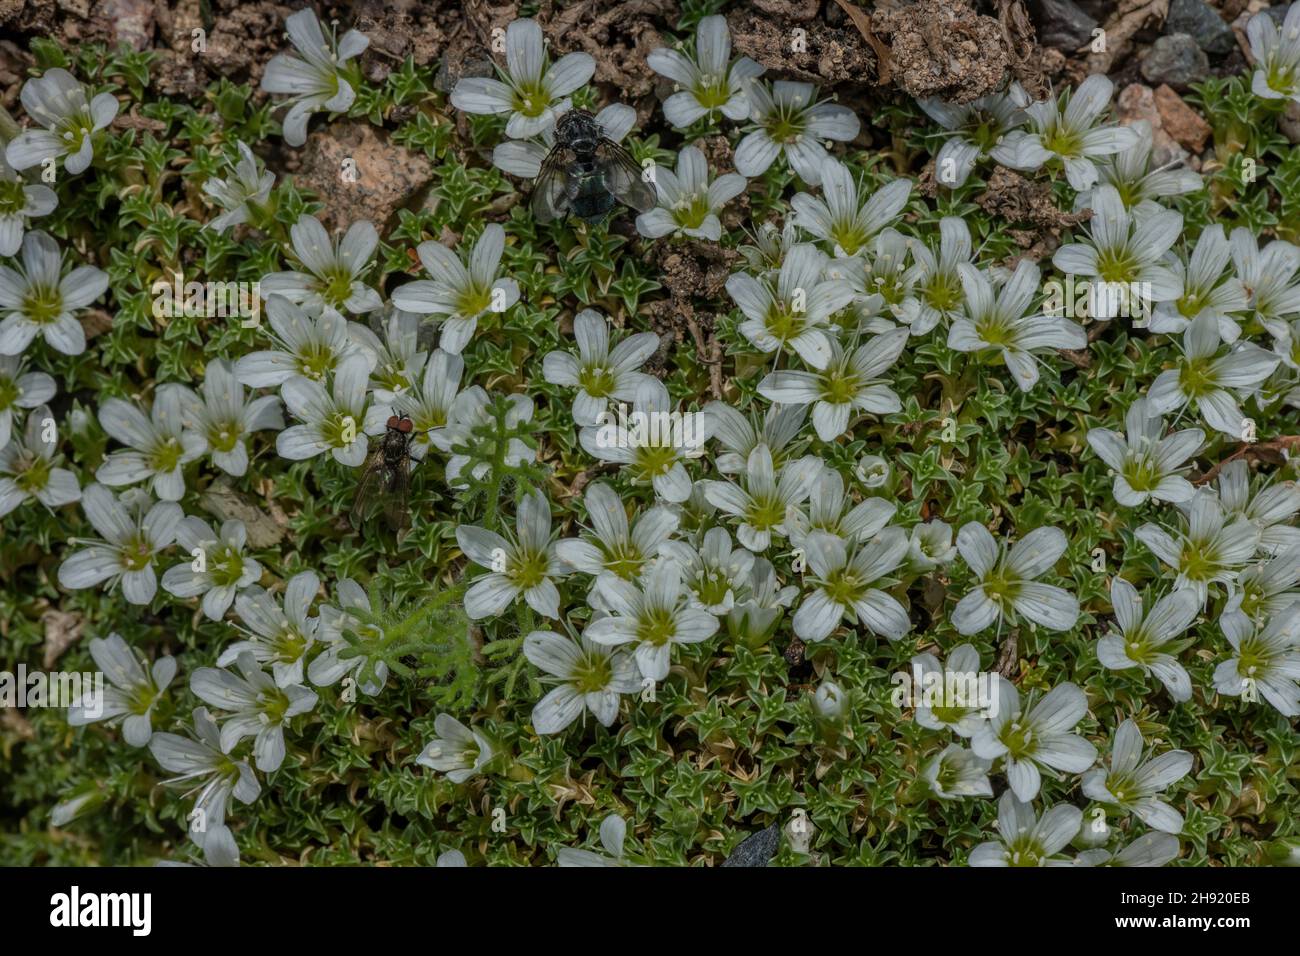 Spanish Sandwort, Arenaria tetraquetra in flower in the Pyrenees. Stock Photo